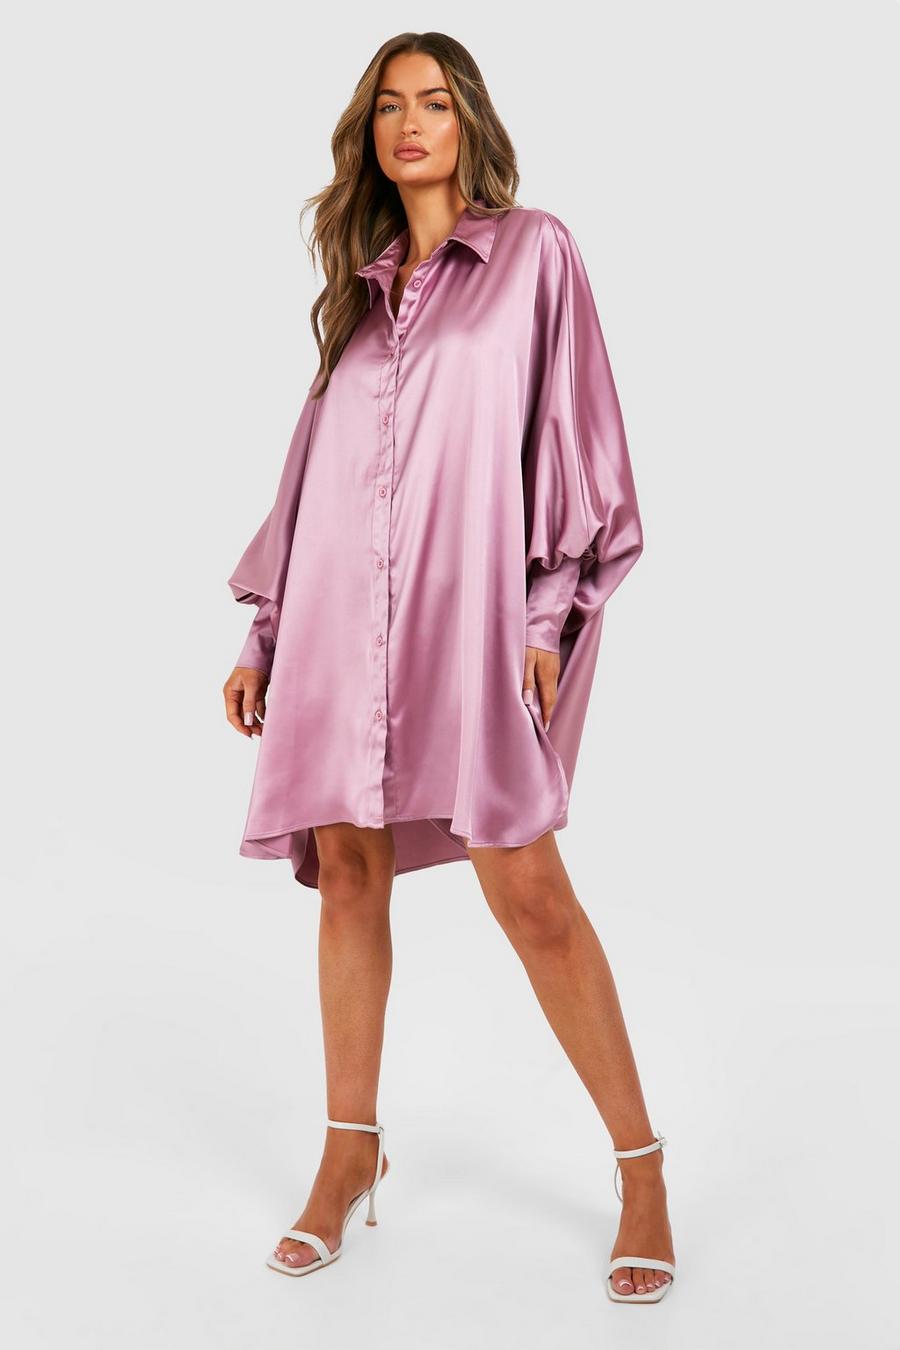 Women's Oversized Clothing, Baggy Clothes